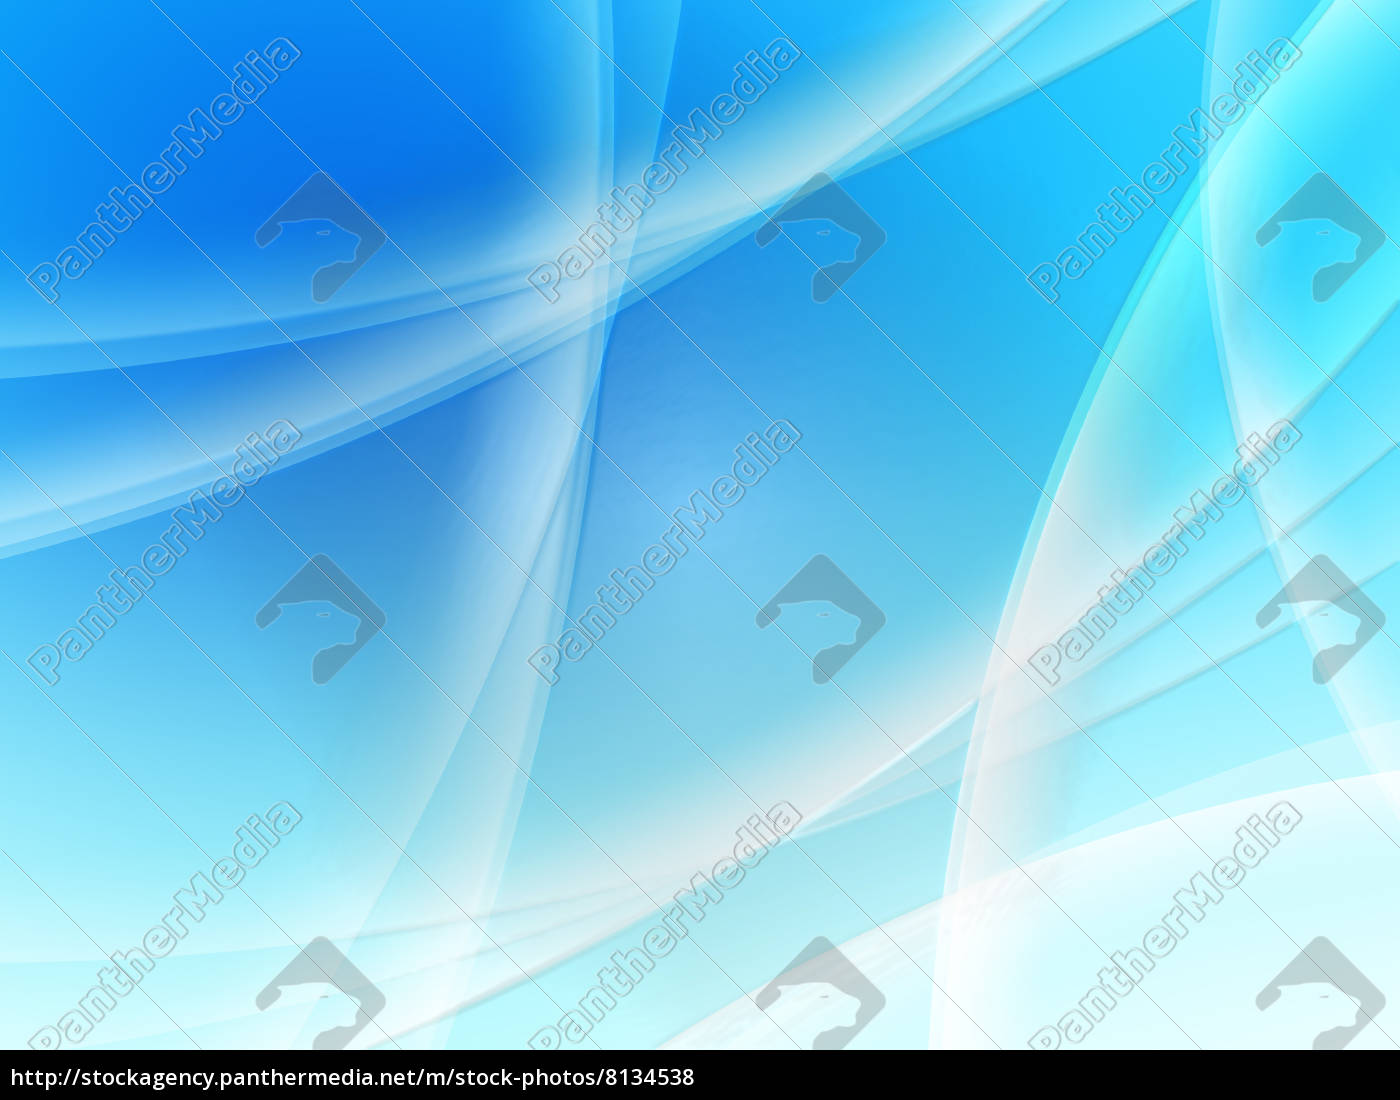 Abstract Wallpaper Background Stock Image 8134538